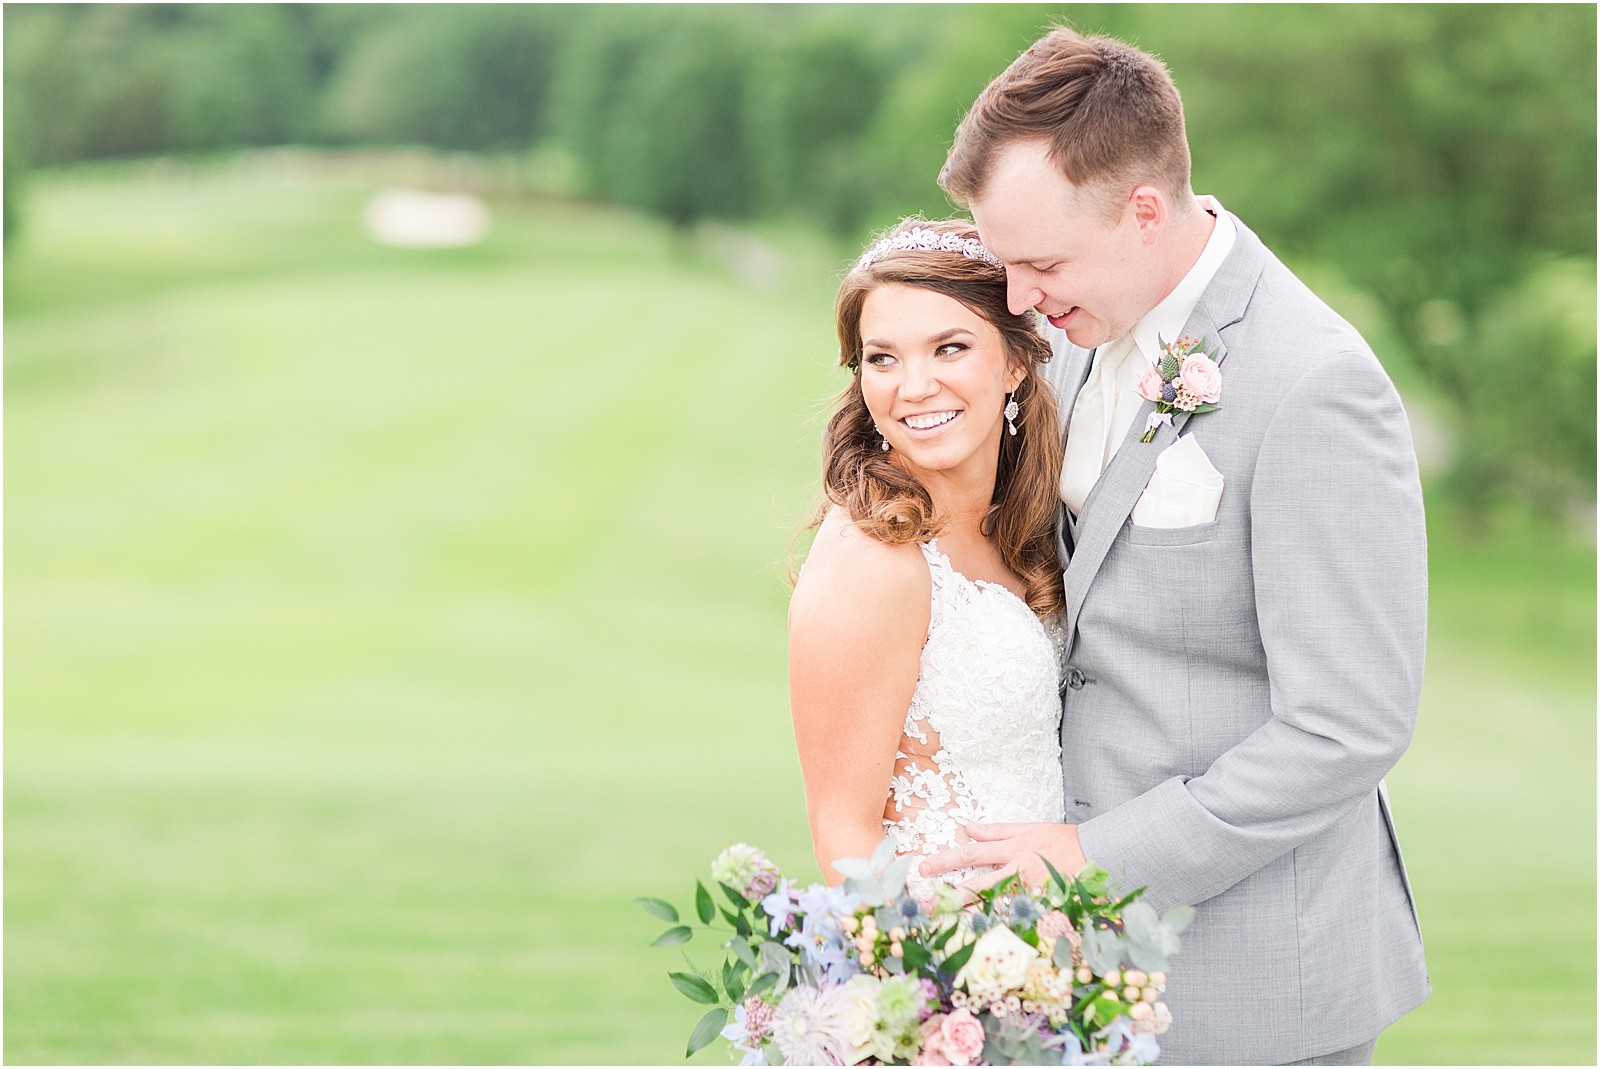 An Evansville County Club Wedding | Abby and Stratton 058.jpg